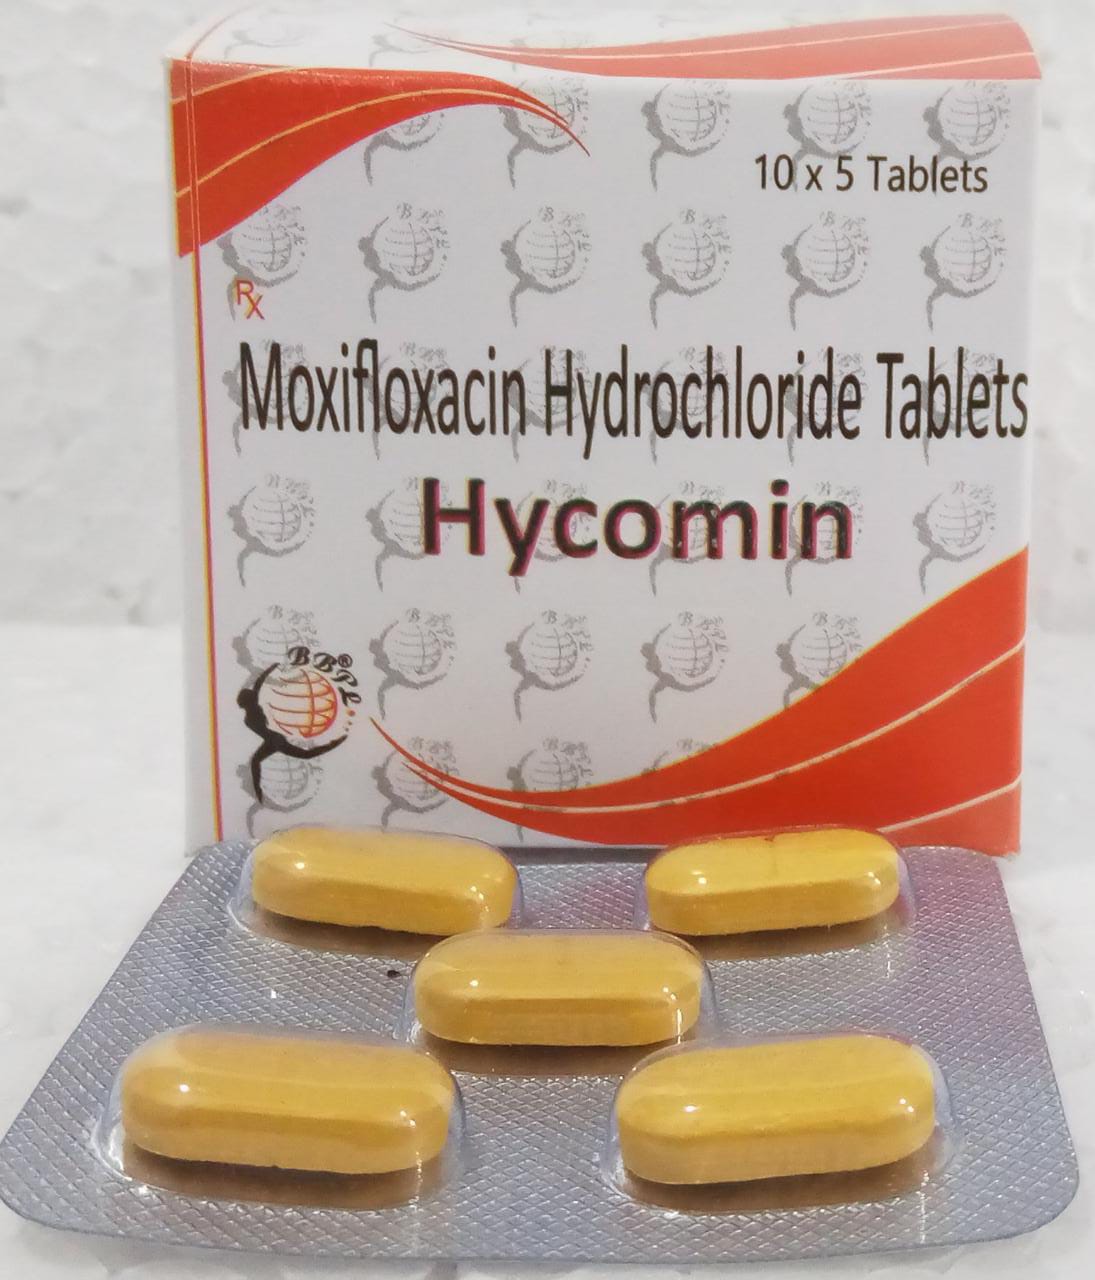 Product Name: Hycomin, Compositions of Hycomin are Moxifloxacin Hydrochloride Tablets - Biomax Biotechnics Pvt. Ltd